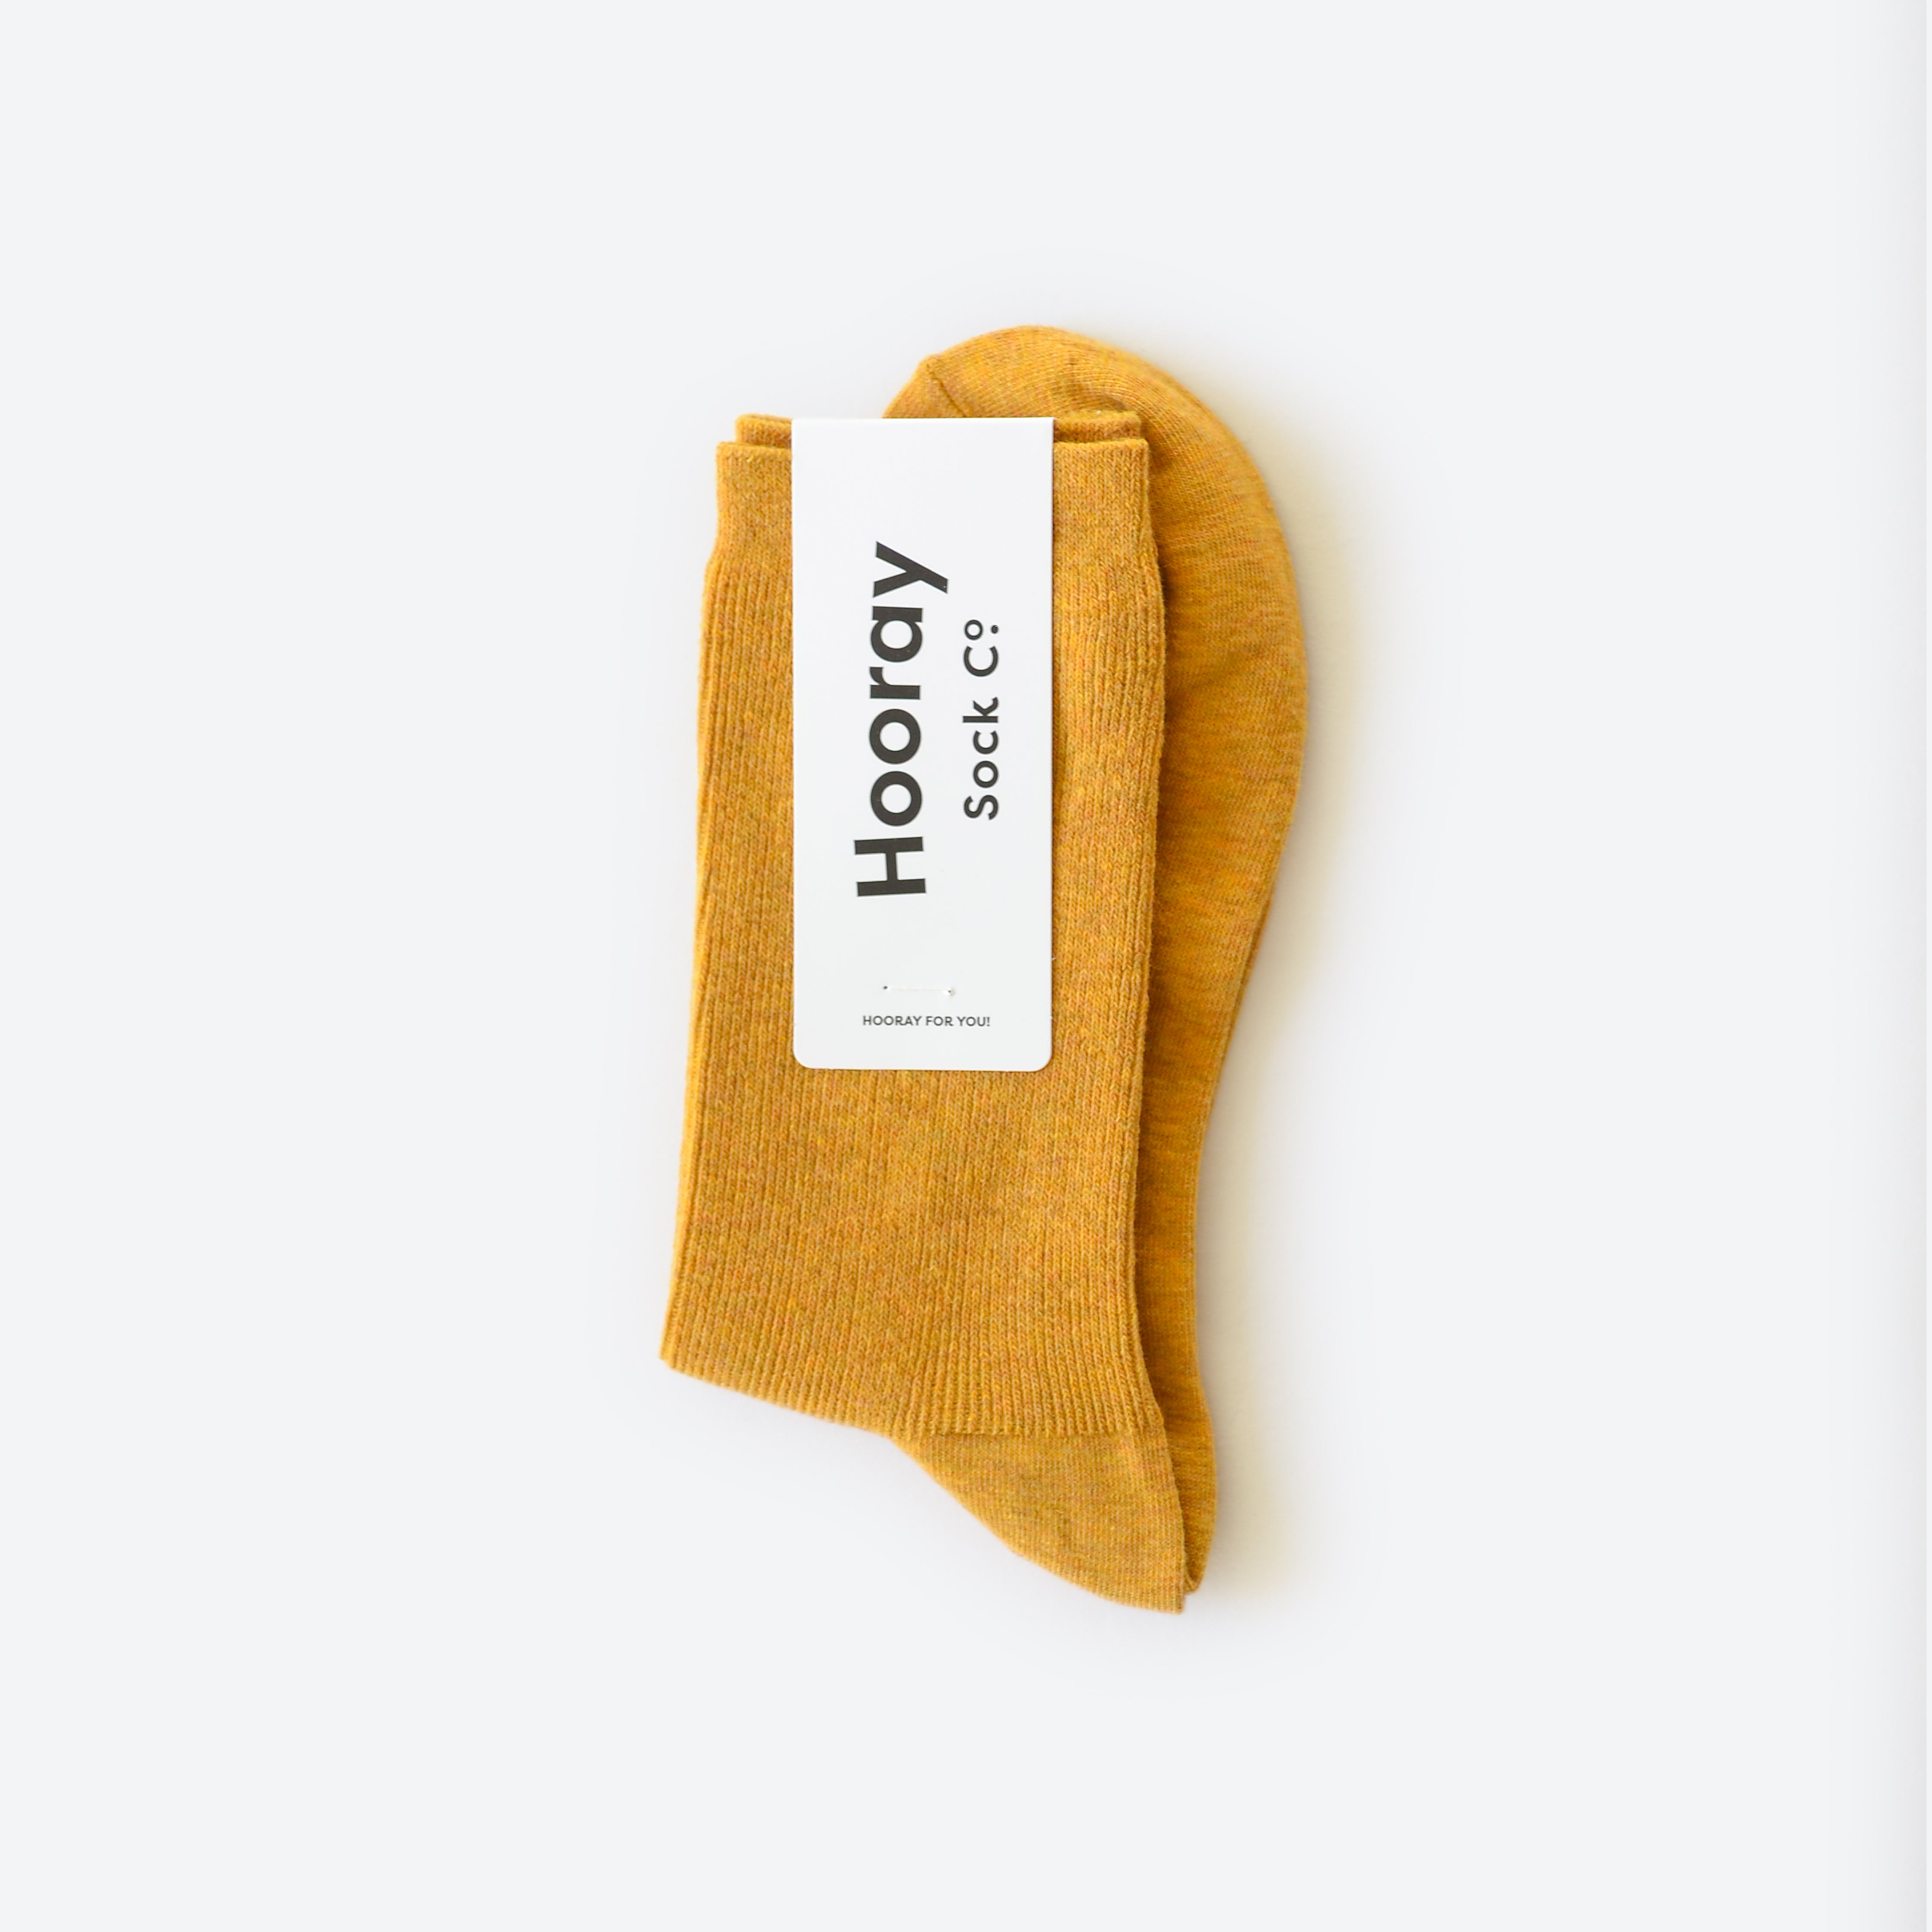 Hooray Sock Co.&#39;s Goldenrod Crew Socks: Everyday Cotton with sunshine-y style. Unisex design, shorter crew length. 80% cotton, 20% spandex. Made in South Korea. Small (Women&#39;s 4-10).